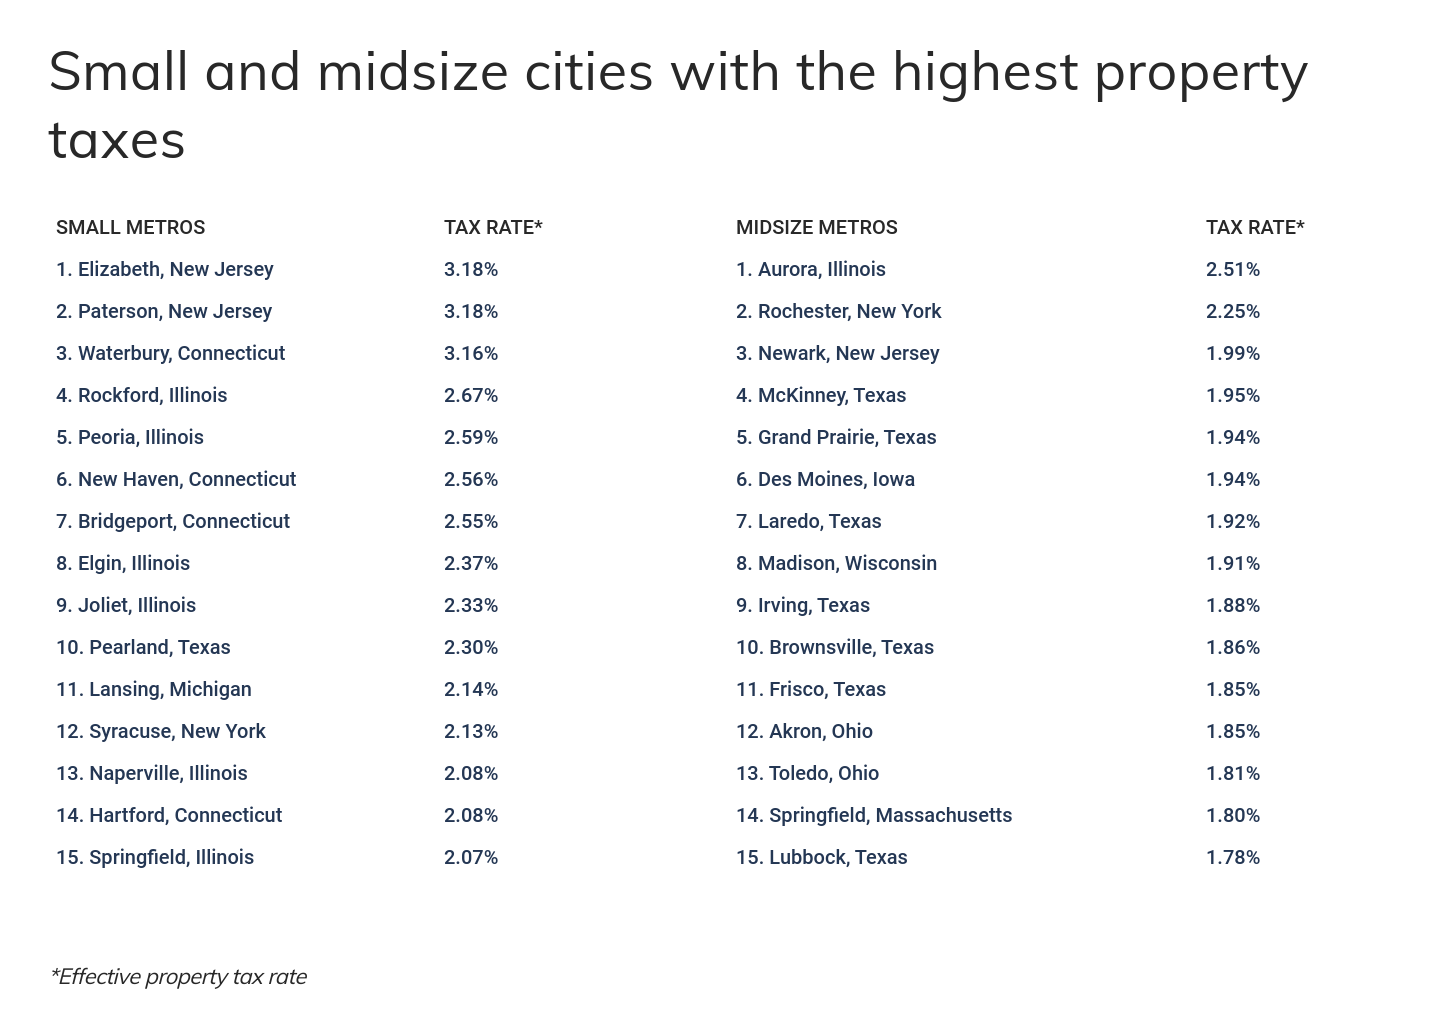 The cities with the highest (and lowest) property taxes